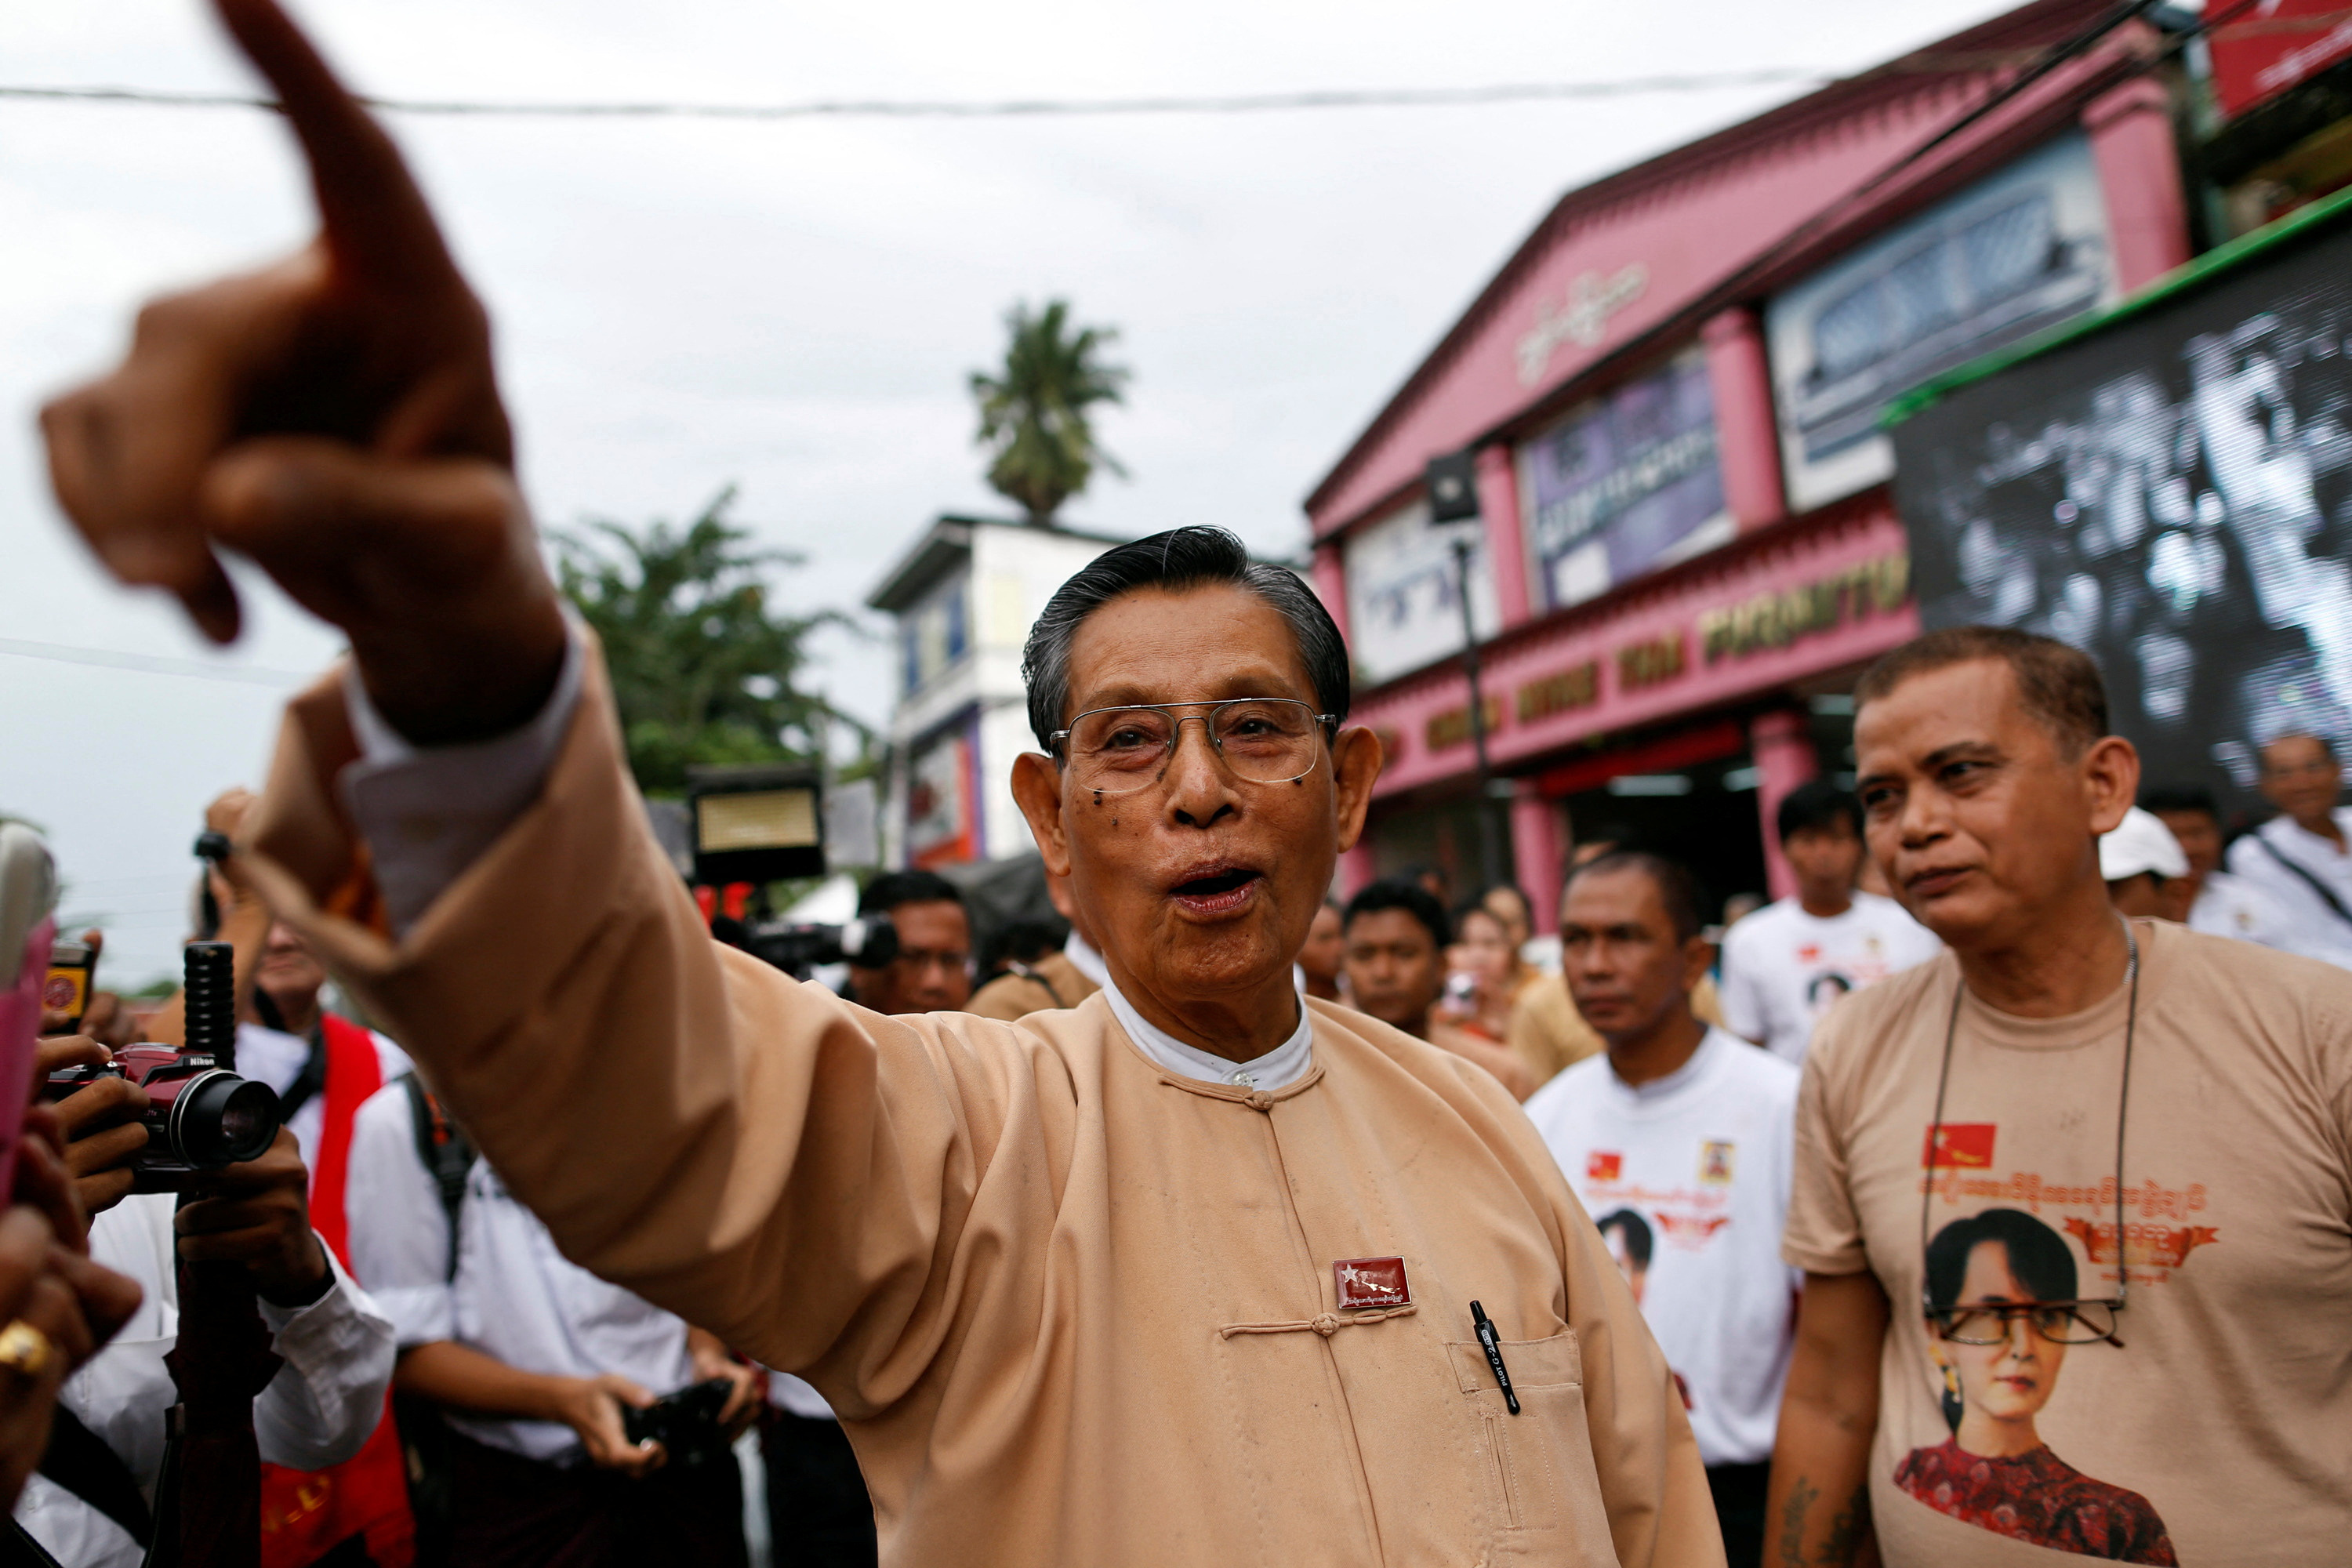 Tin Oo, a patron of the NLD, points out other party members at a ceremony to mark the 25th anniversary of the founding of the NLD in Yangon